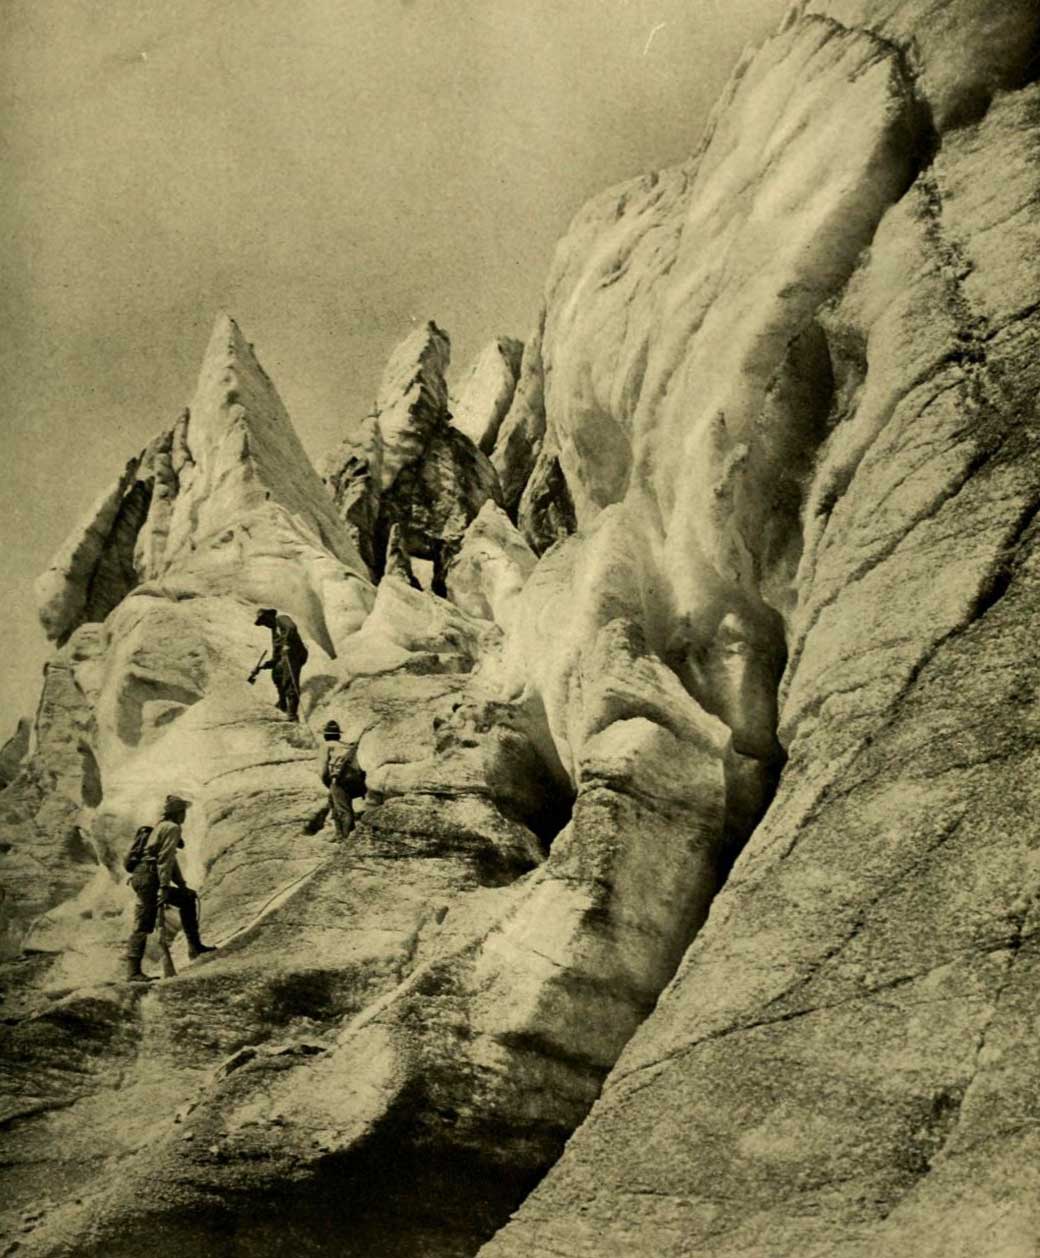 Working up through the vast and broken front of Hunga Glacier. Photo: R. C. W. Lett, 1911